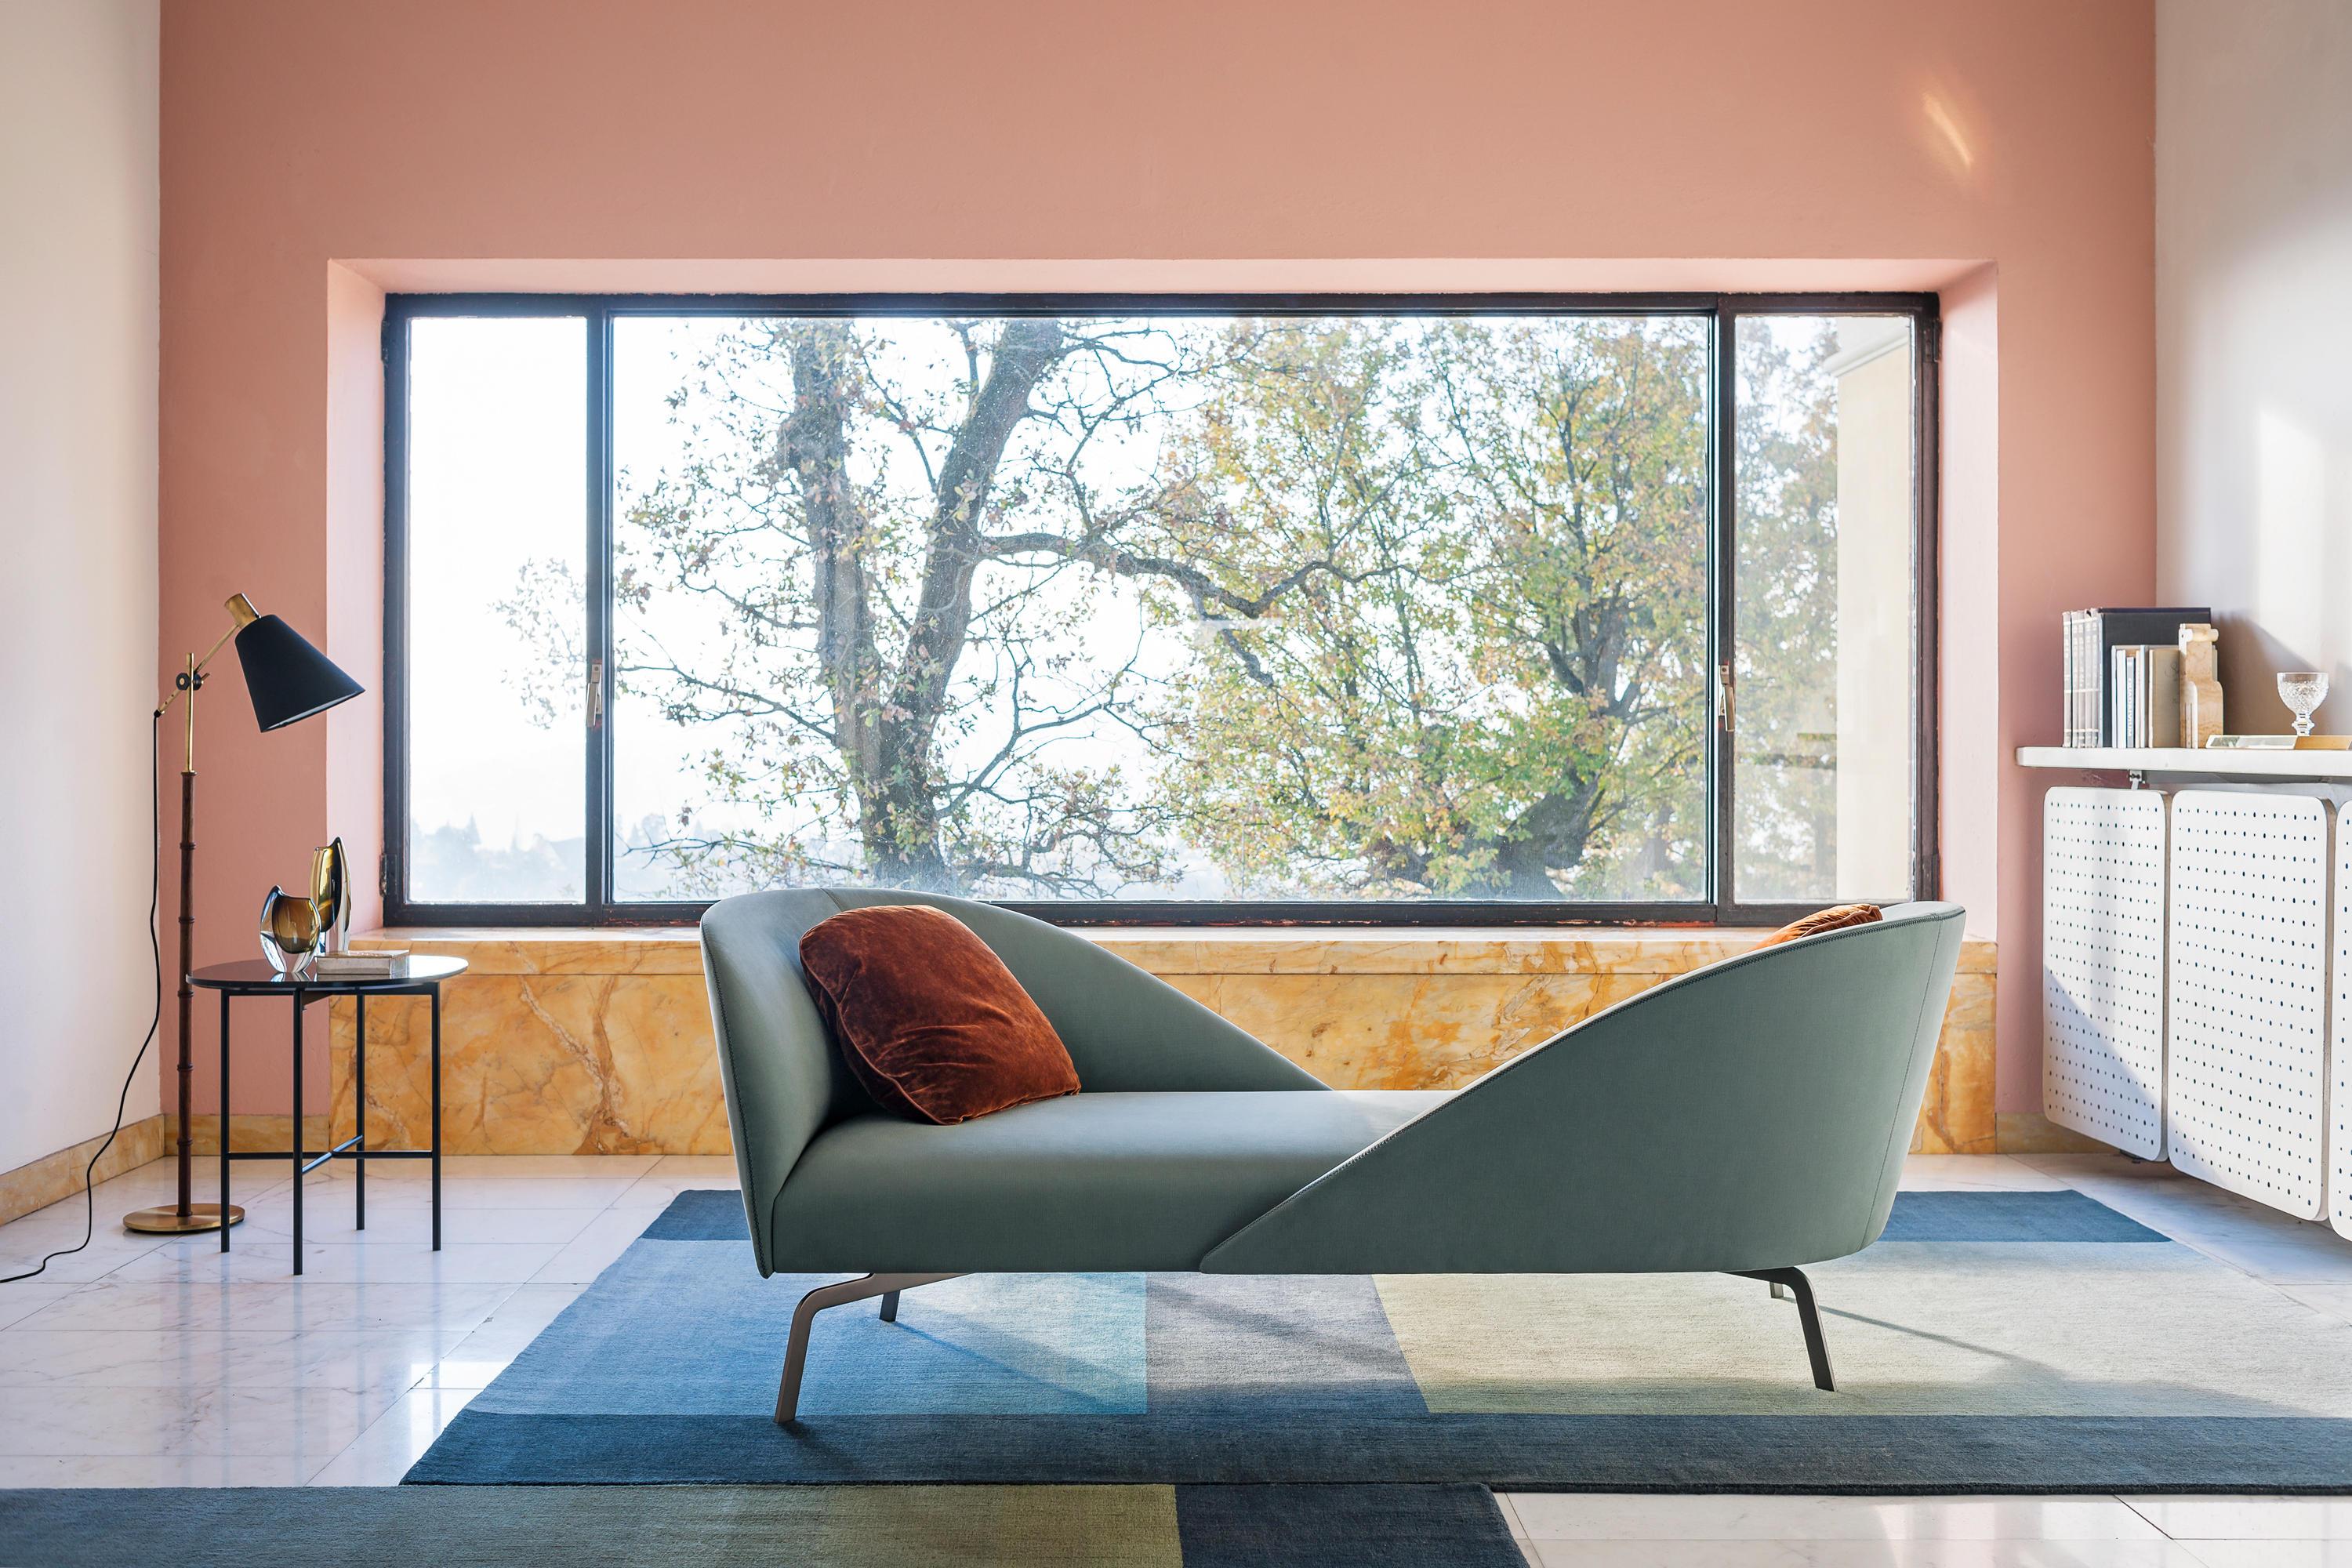 Face to Face is an original reinterpretation of the sofa as a space for one-to-one relations, with two opposing backs and soft, feather cushions inviting people to sit vis-à-vis. With its light, classical style, Face to Face is conceived to take a